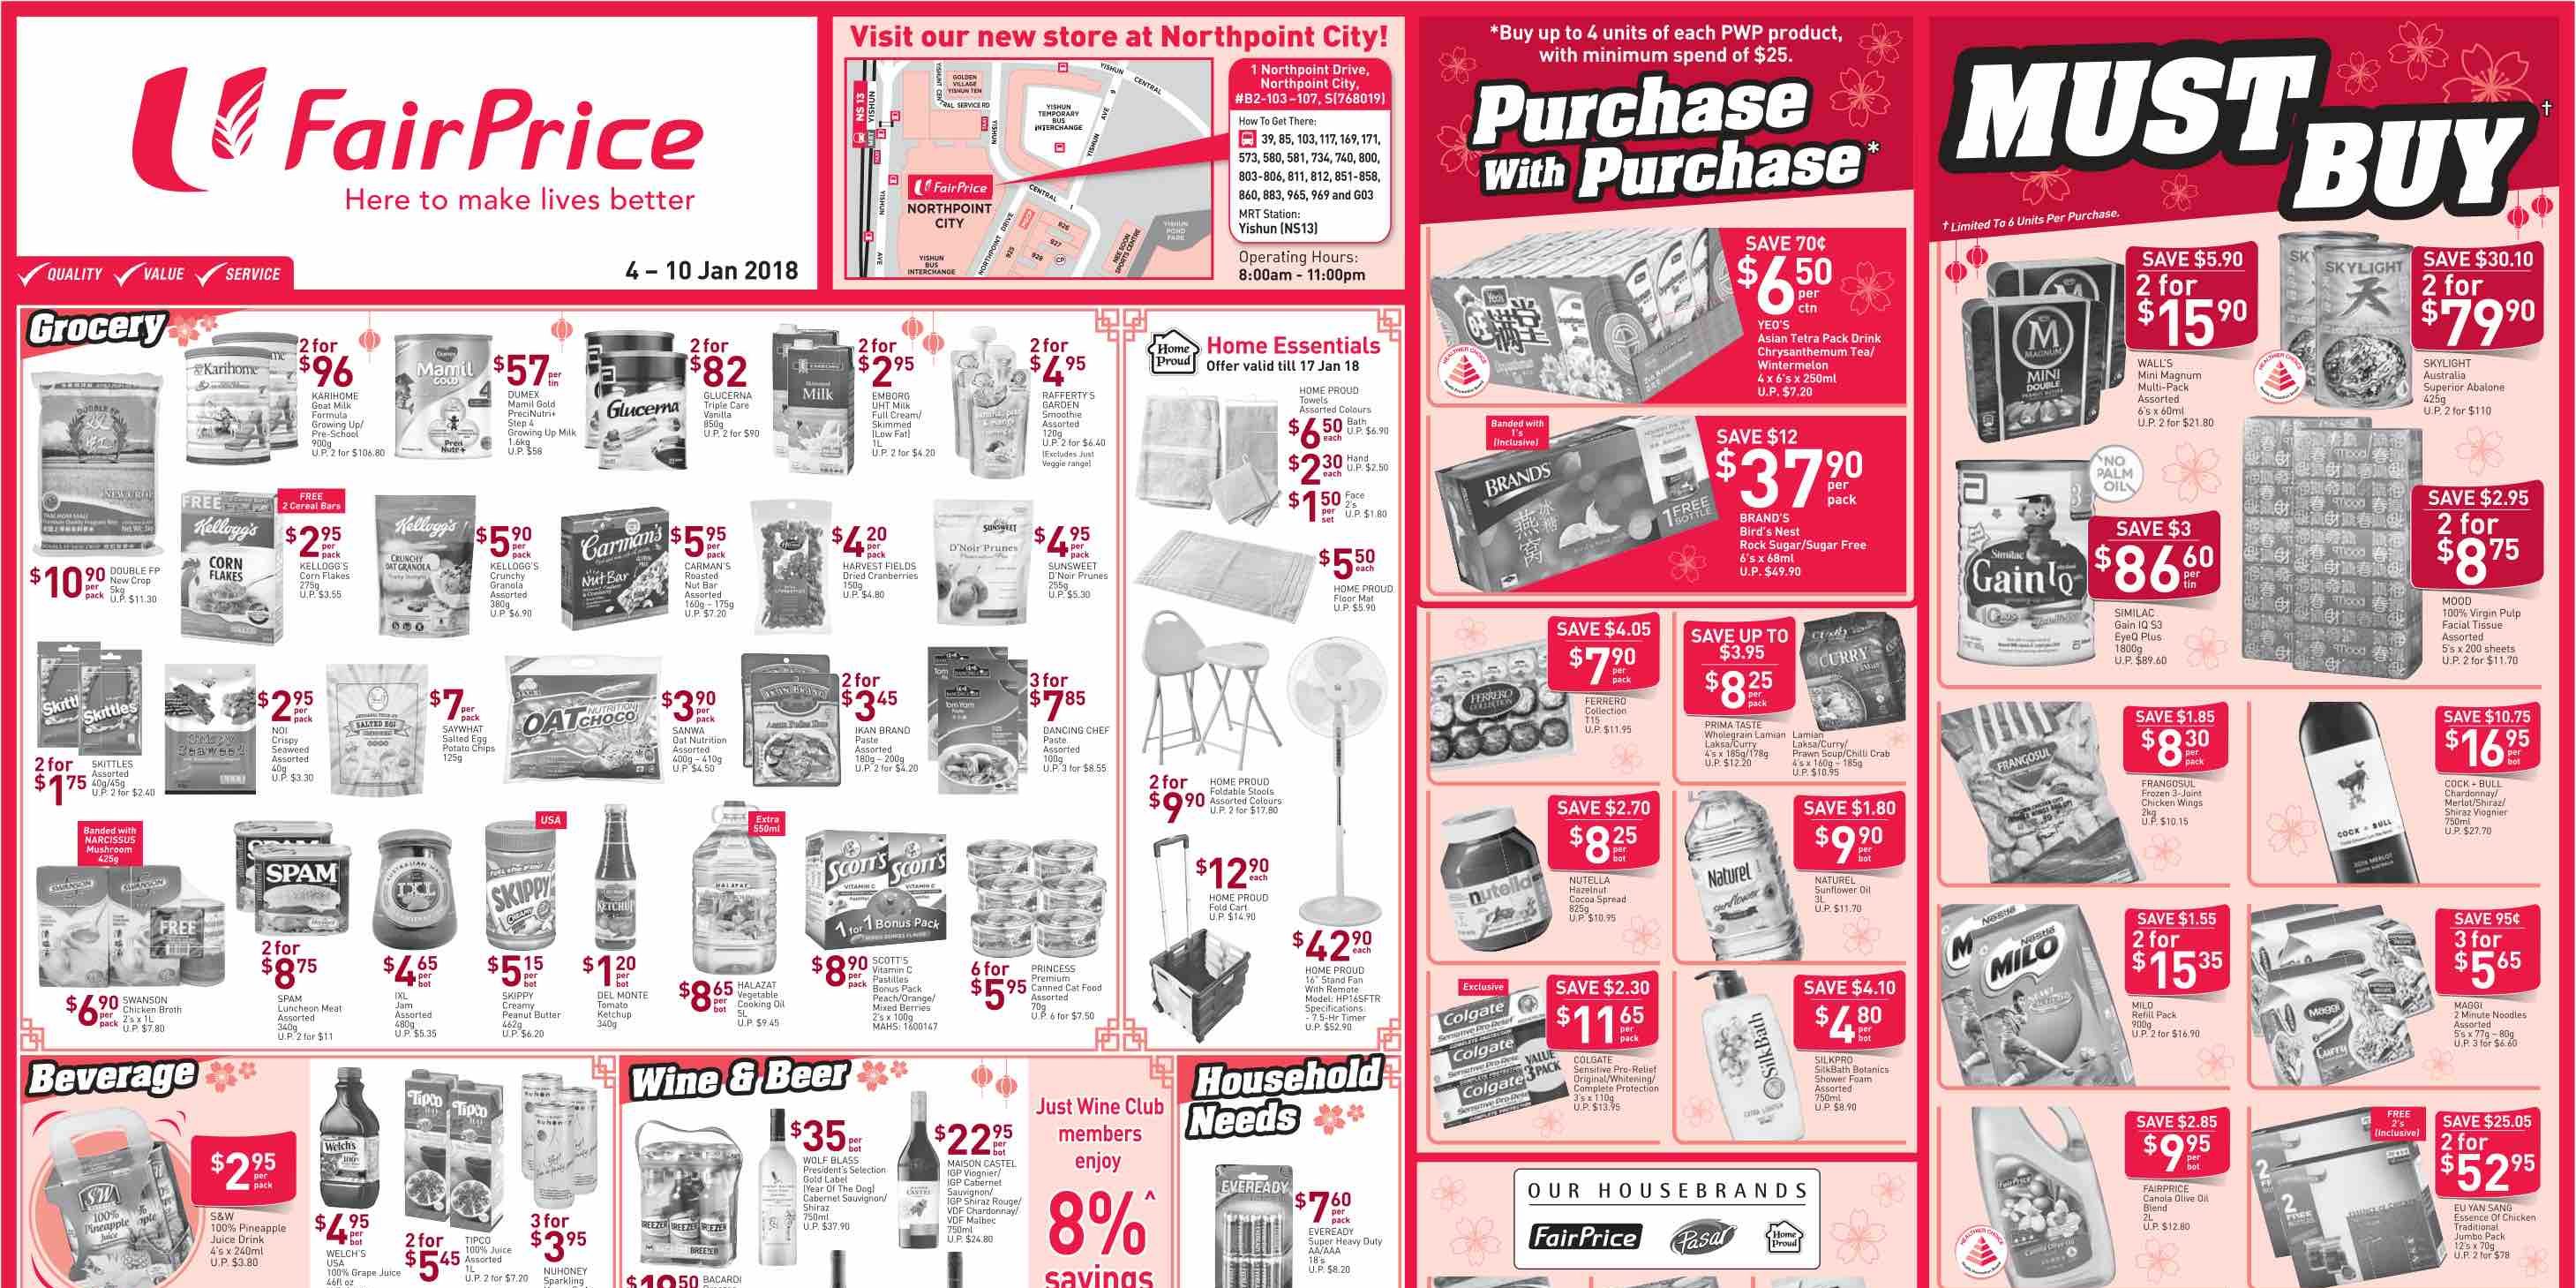 NTUC FairPrice Singapore Your Weekly Savers Promotions 4-10 Jan 2018